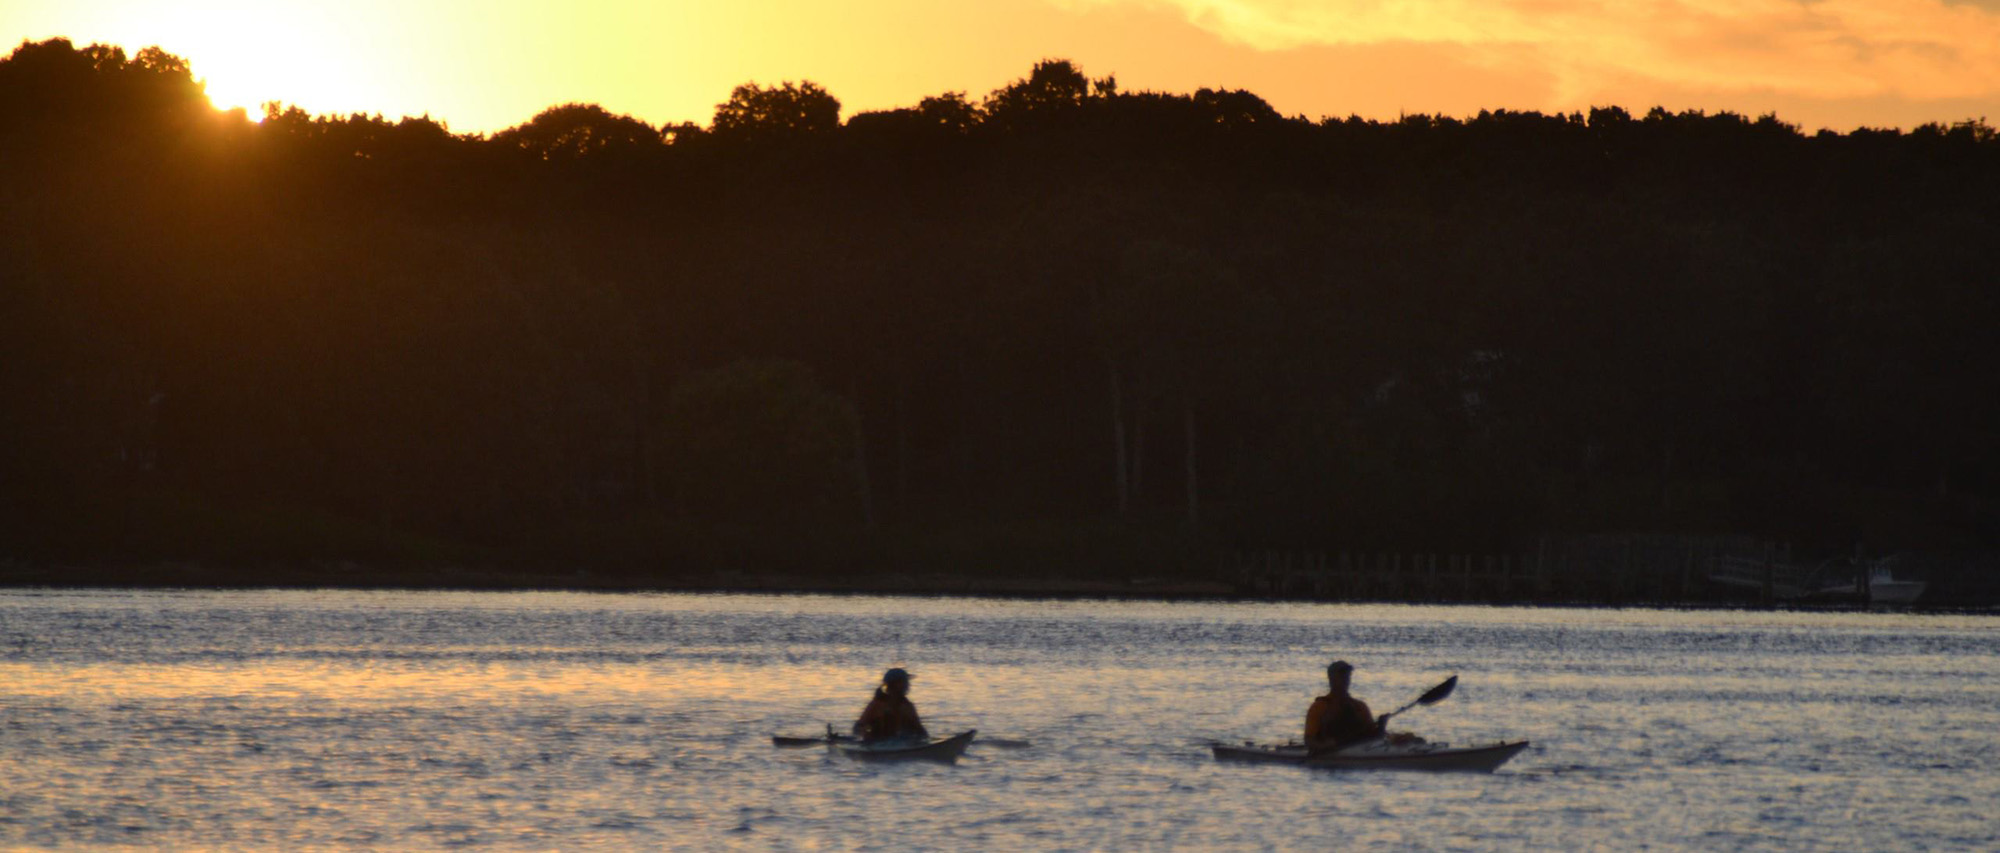 kayakers on river at sunset